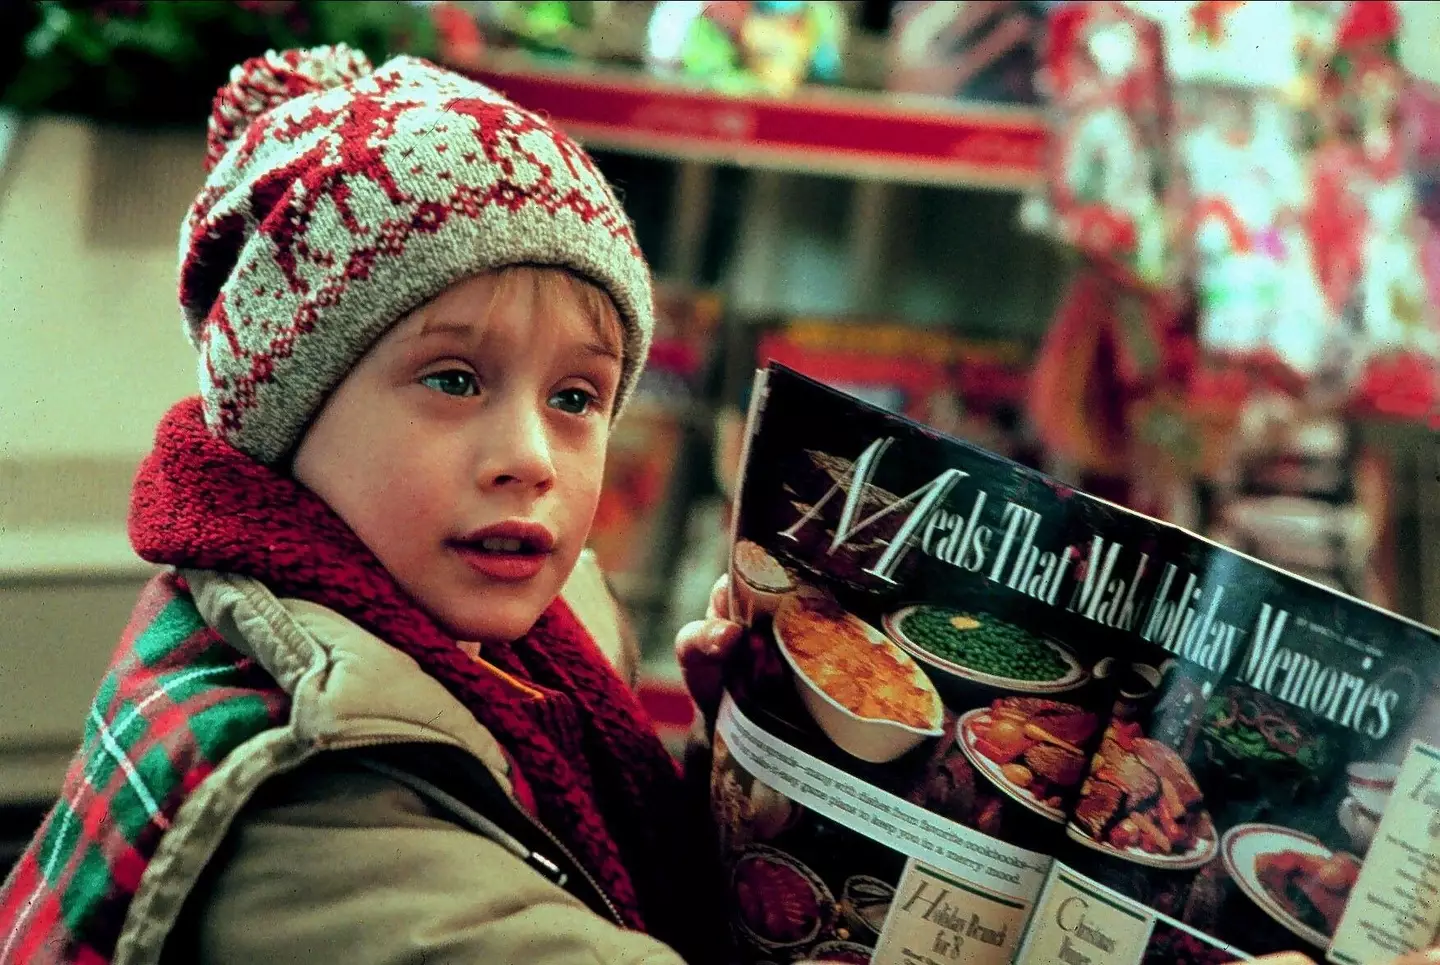 Home Alone is one of the most loved Christmas films.